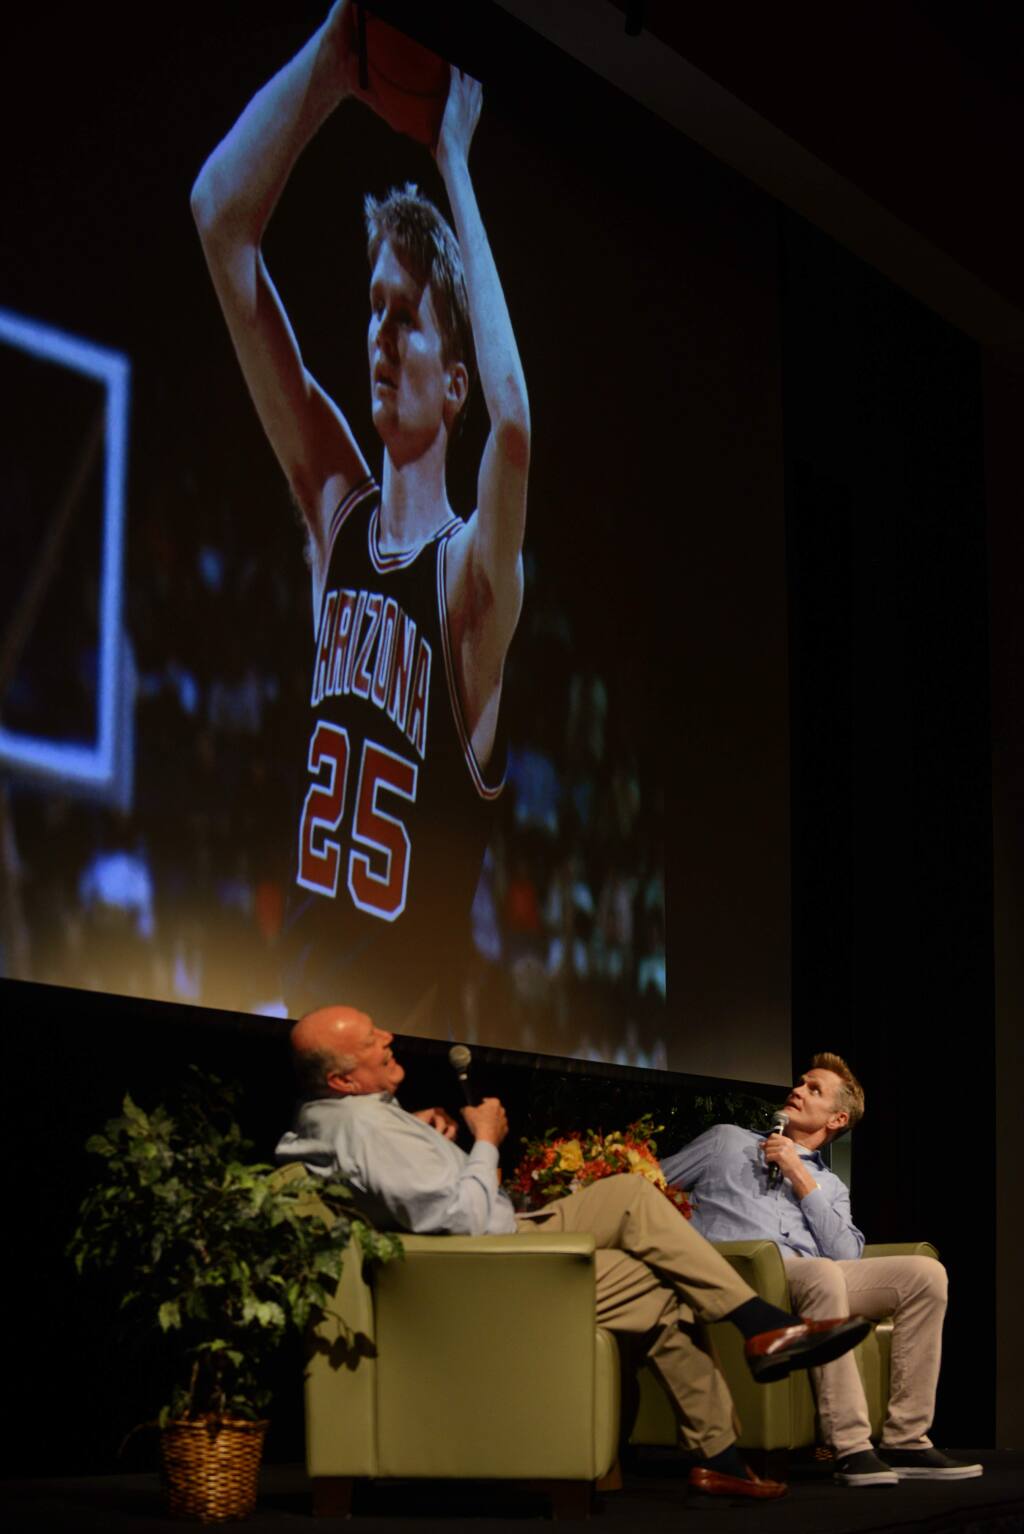 Head Coach of the Golden State Warriors Steve Kerr, right, checking out an old photo from his college days during a conversation with former Head Coach and General Manager of the Warriors Garry St. Jean, left, at the Sonoma Speakers Series held Monday evening at Hanna Boys Center in Sonoma, California. October 1, 2018.(Photo: Erik Castro/for The Press Democrat)